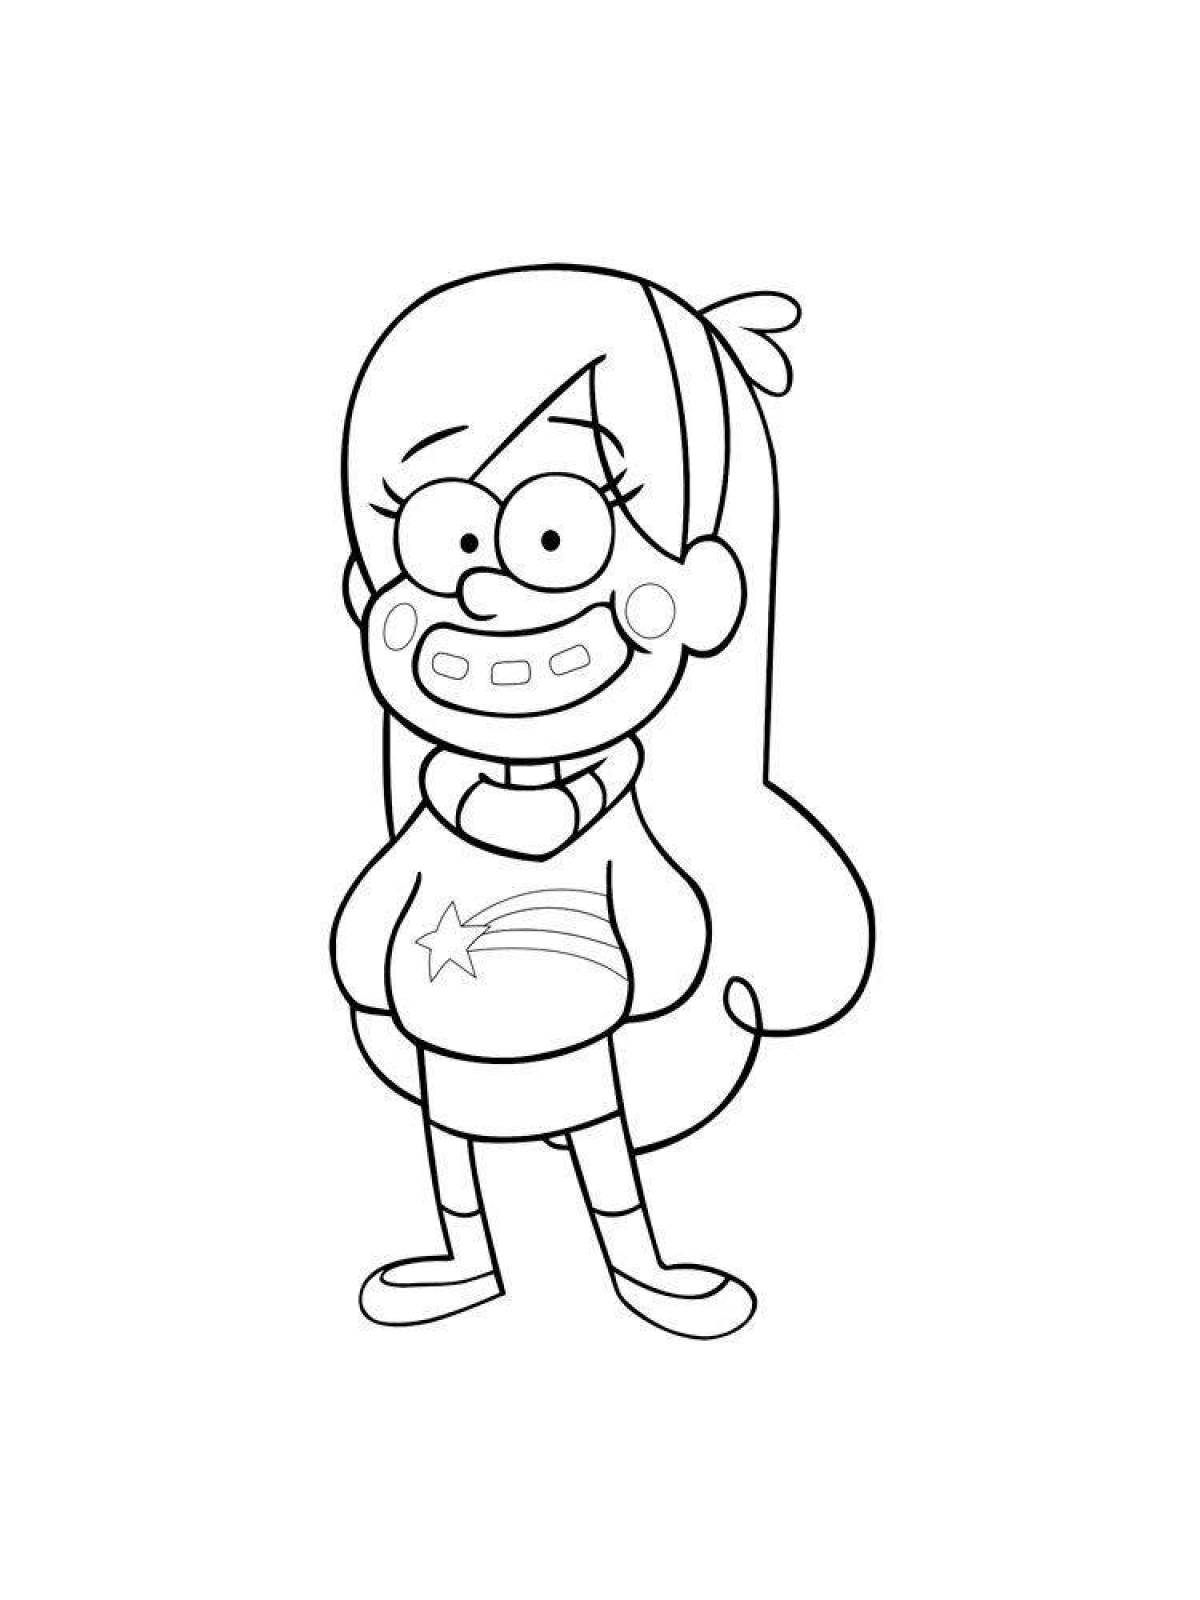 Cool mabel from gravity falls